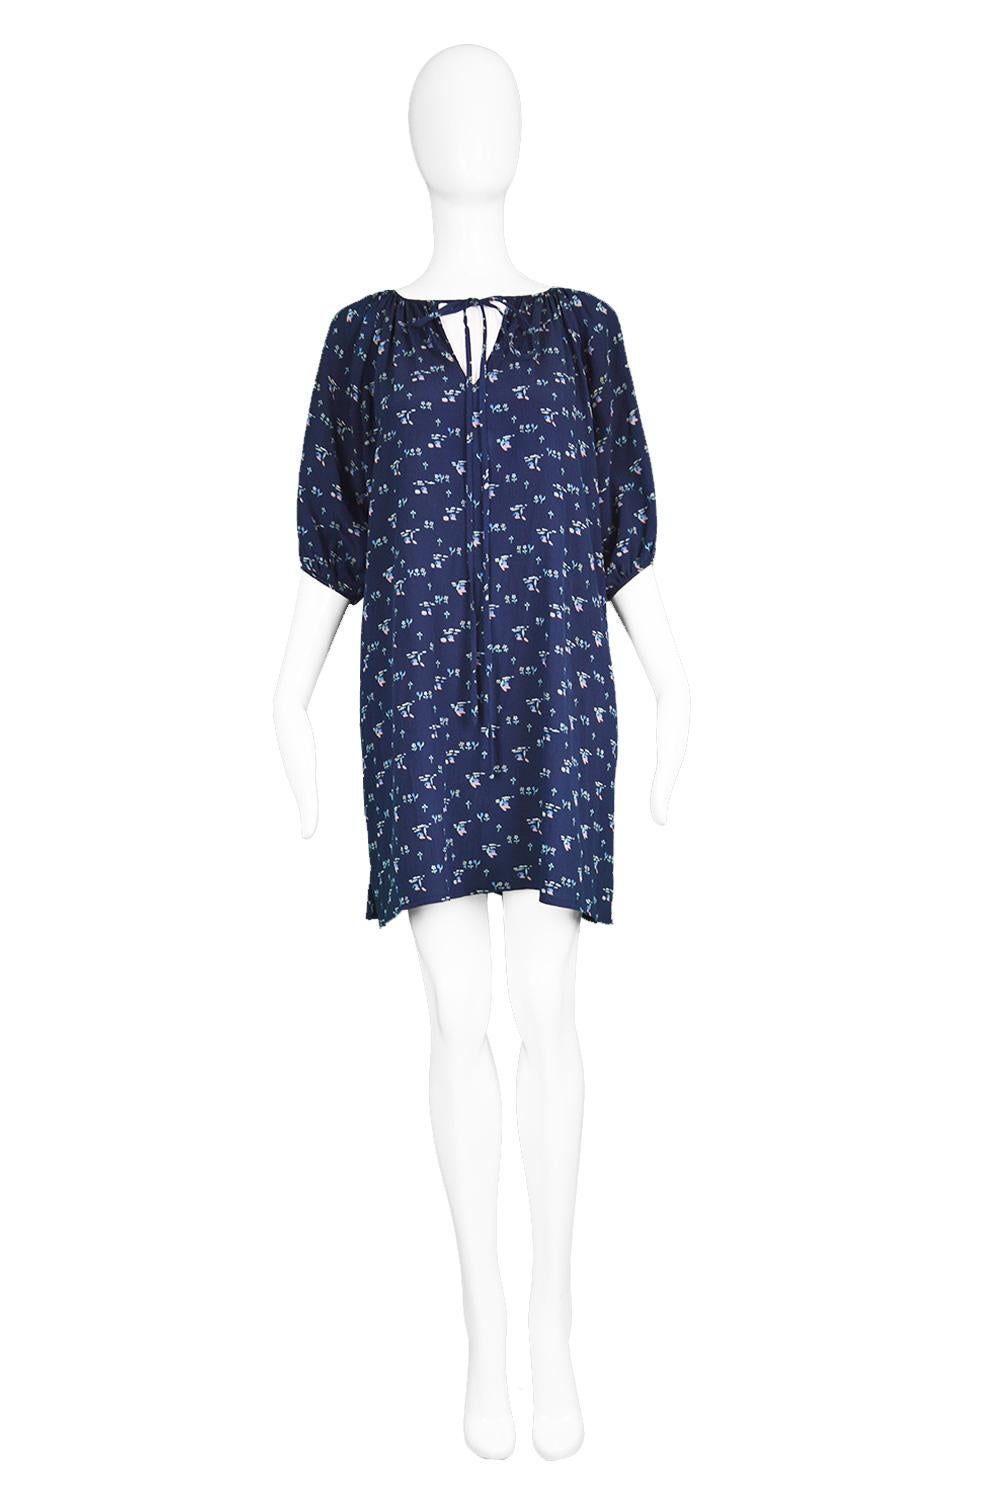 Chloé by Karl Lagerfeld Vintage Dark Blue Crinkled Silk Floral Mini Dress, 1970s

Click 'Continue Reading' below to see size & description. 

Size: Marked FR 38 which is a UK 10/ US 6 but this gives a loose, flowing silhouette and would also suit